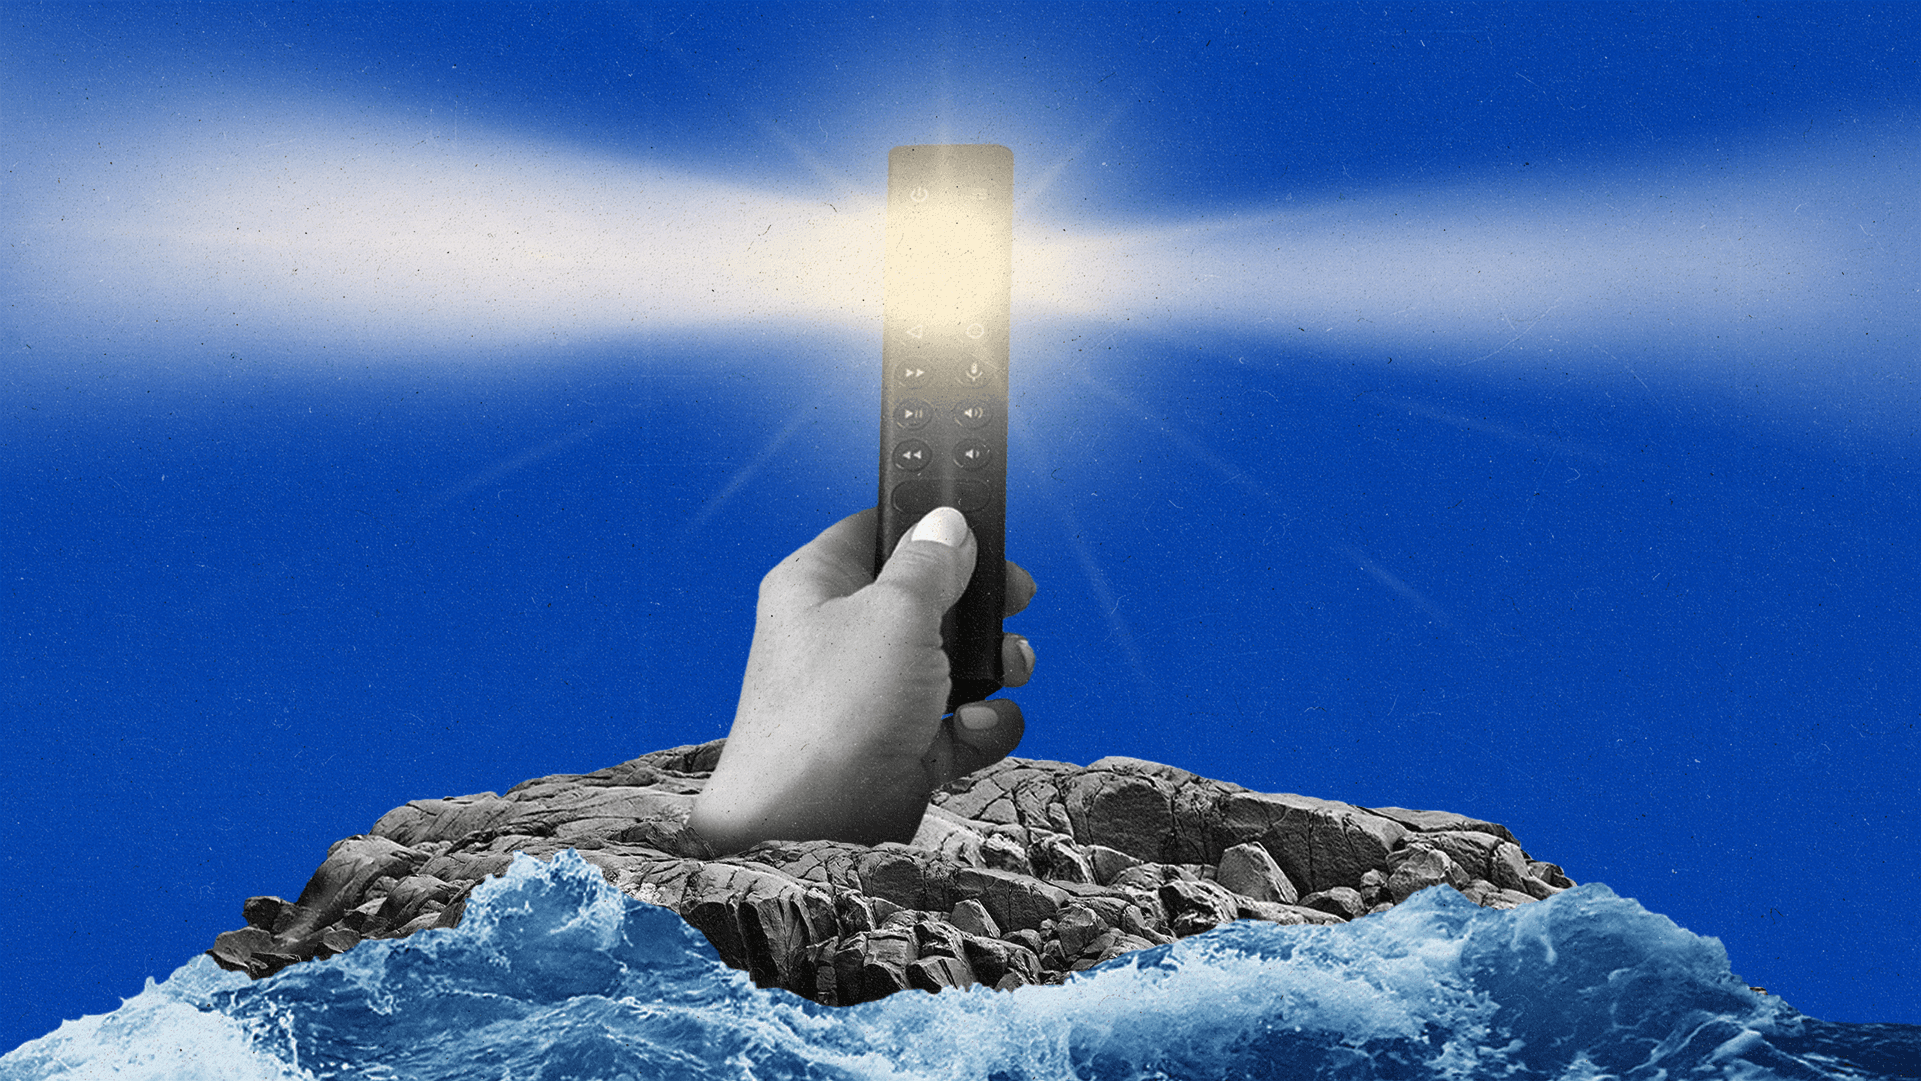 Streaming remote standing on a rocky shore with light coming from the top like a lighthouse.